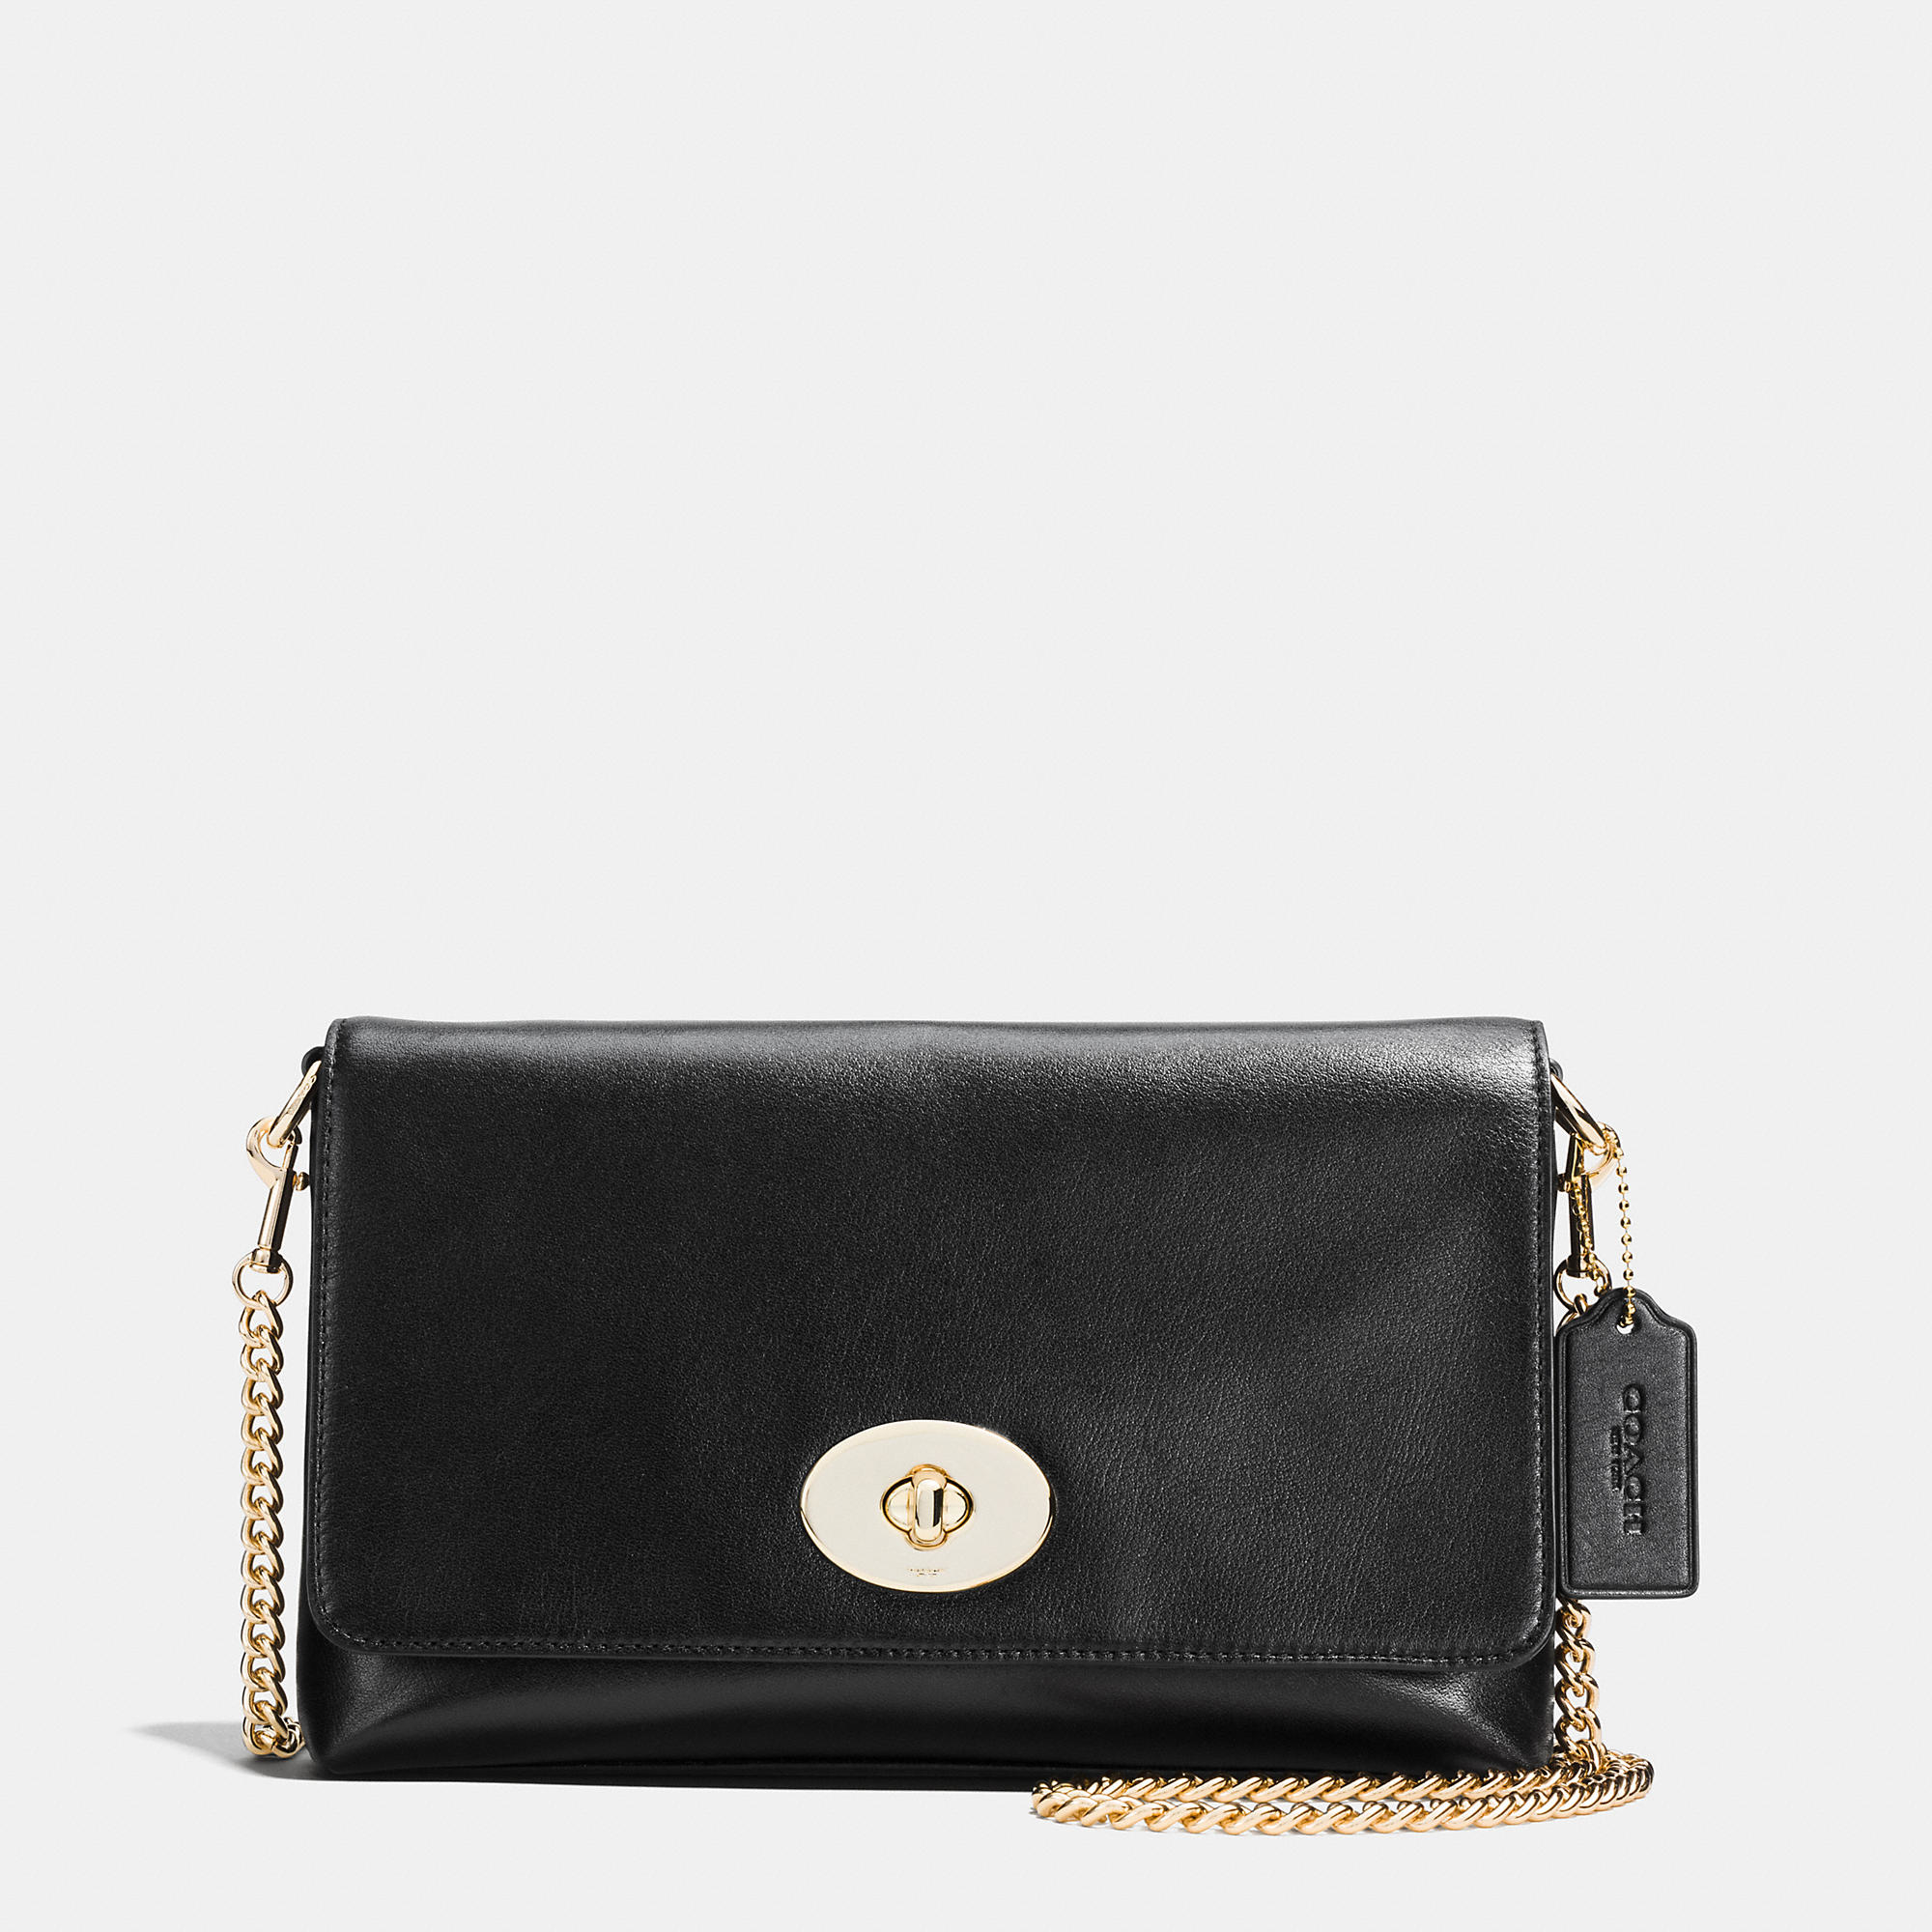 COACH Crosstown Crossbody In Smooth Calf Leather in Light Gold/Black (Black) - Lyst